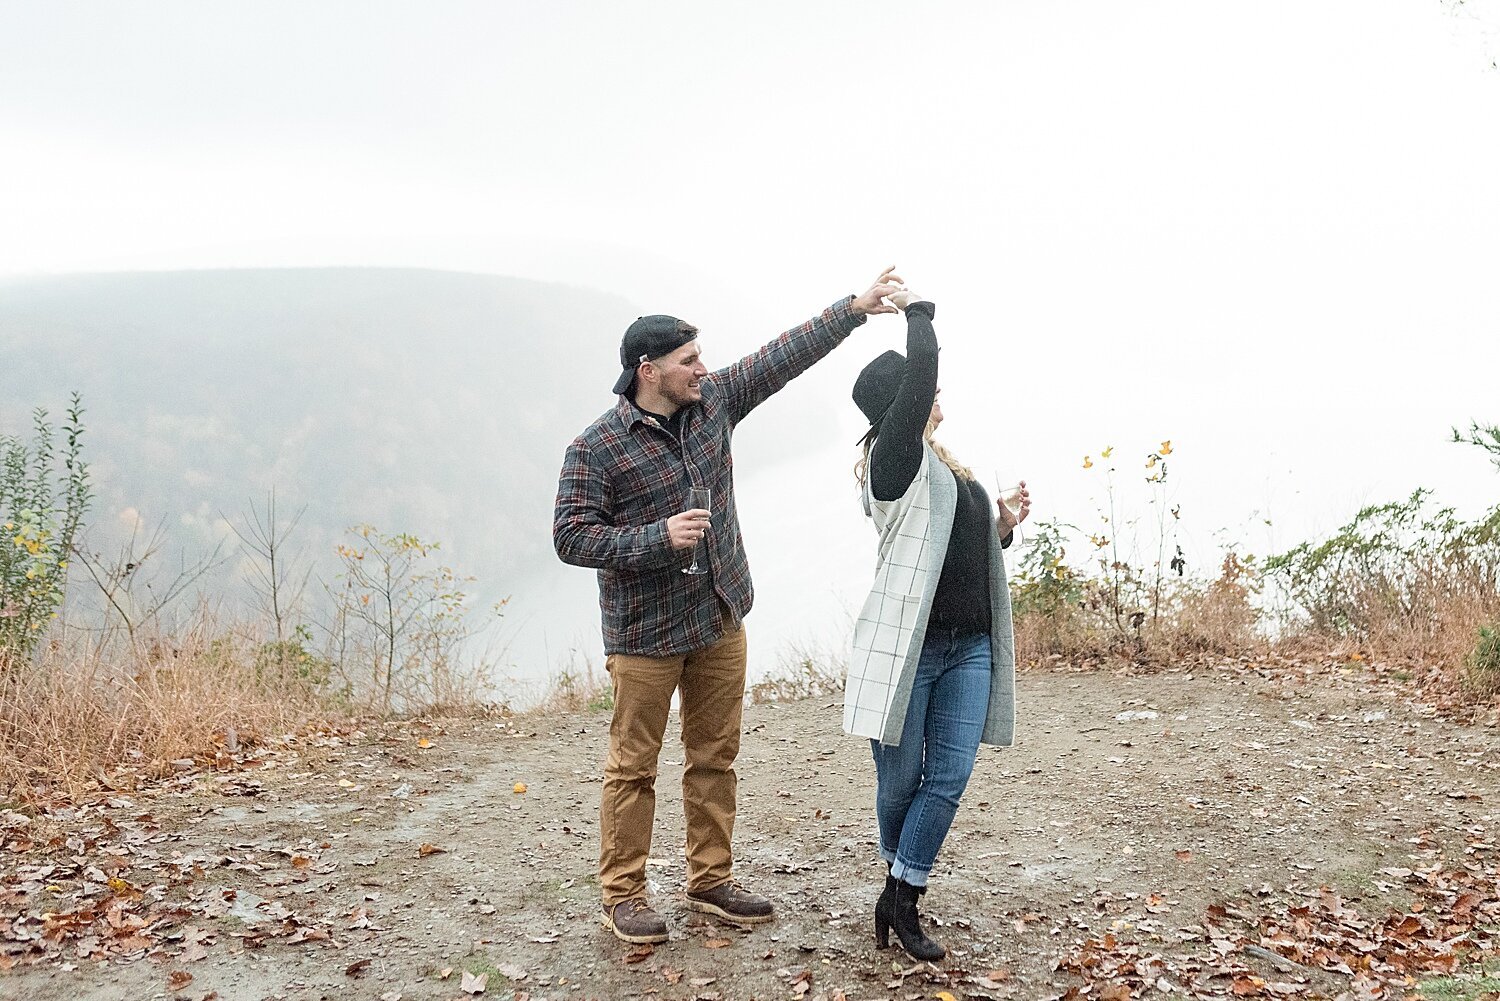 Pinnacle Overlook Holtwood PA Surprise Proposal Photography_8751.jpg